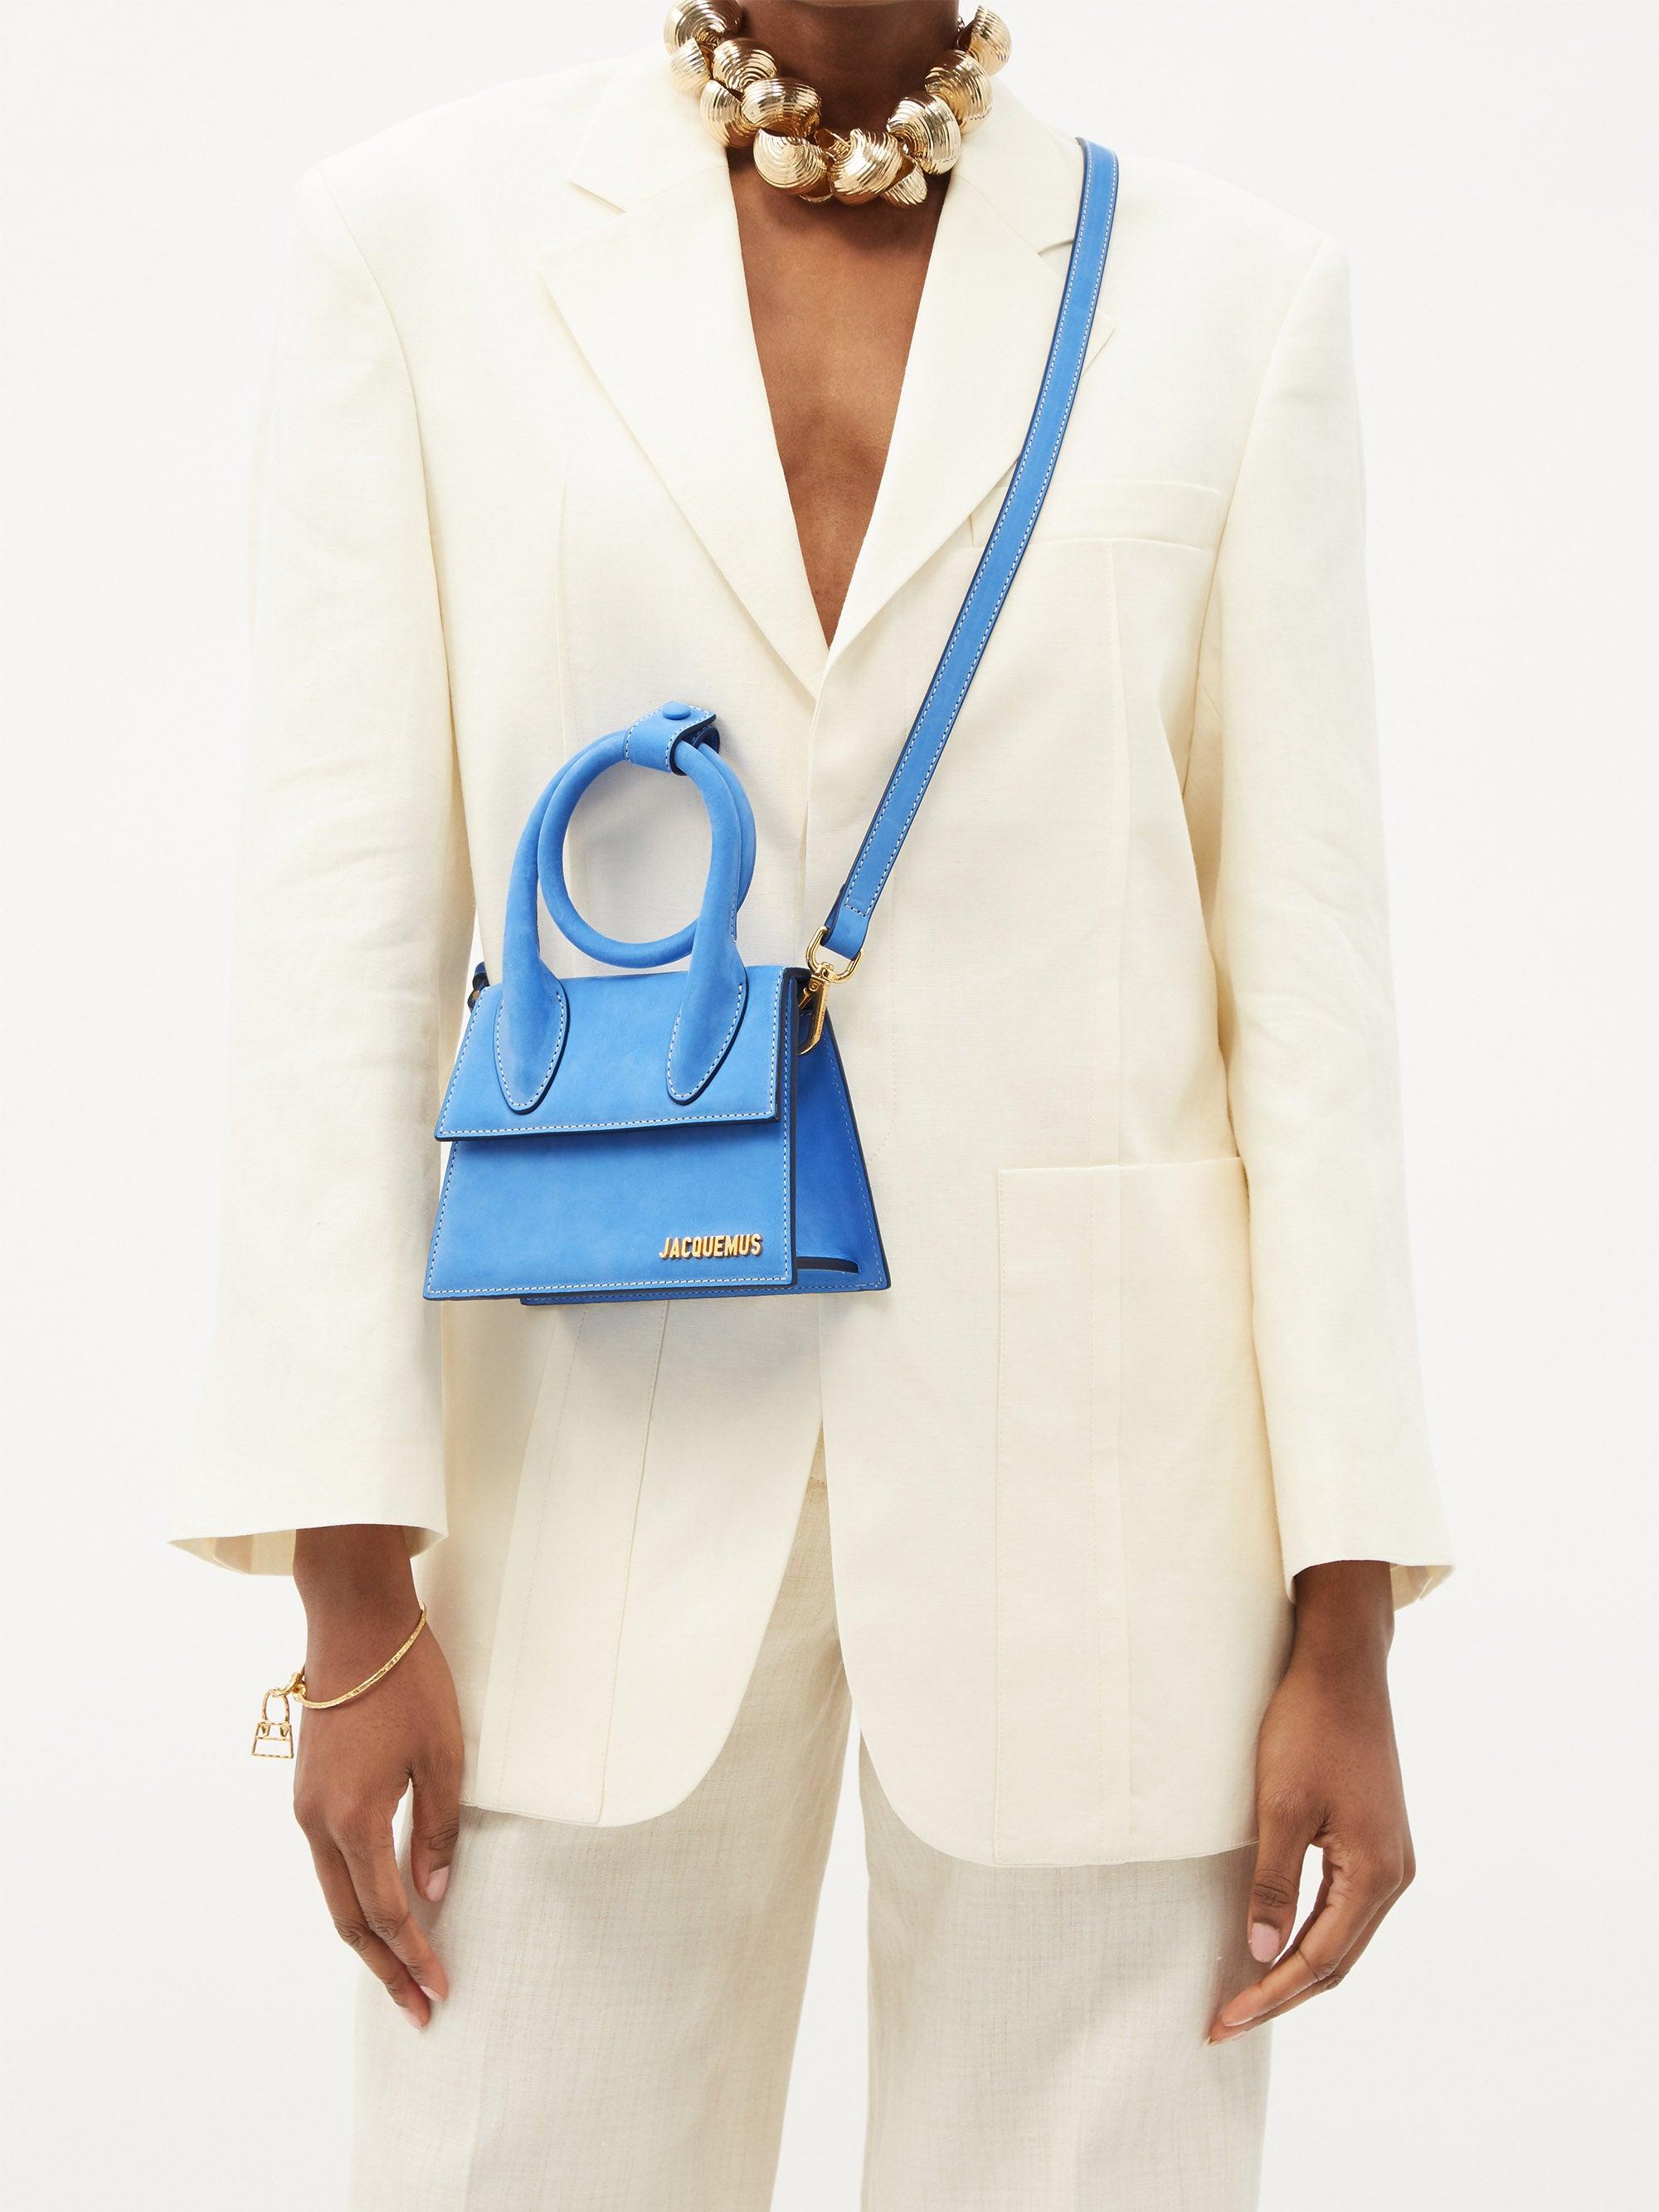 Jacquemus Chiquito Noeud Leather Cross-body Bag in Blue - Lyst